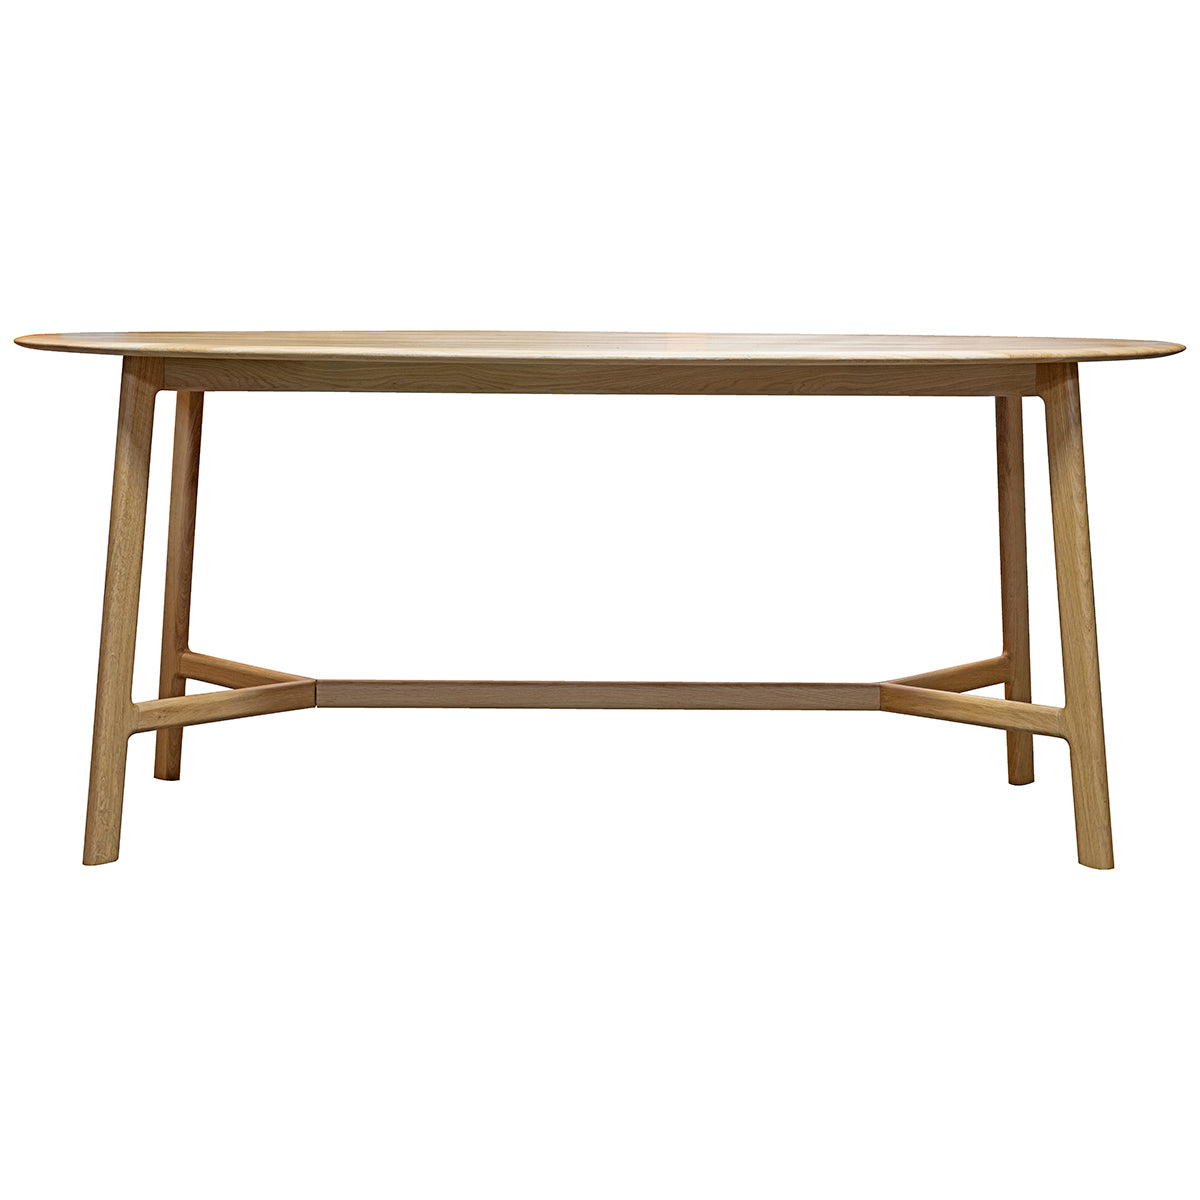 A wooden top Oval Dining Table from Kikiathome.co.uk for interior decor.